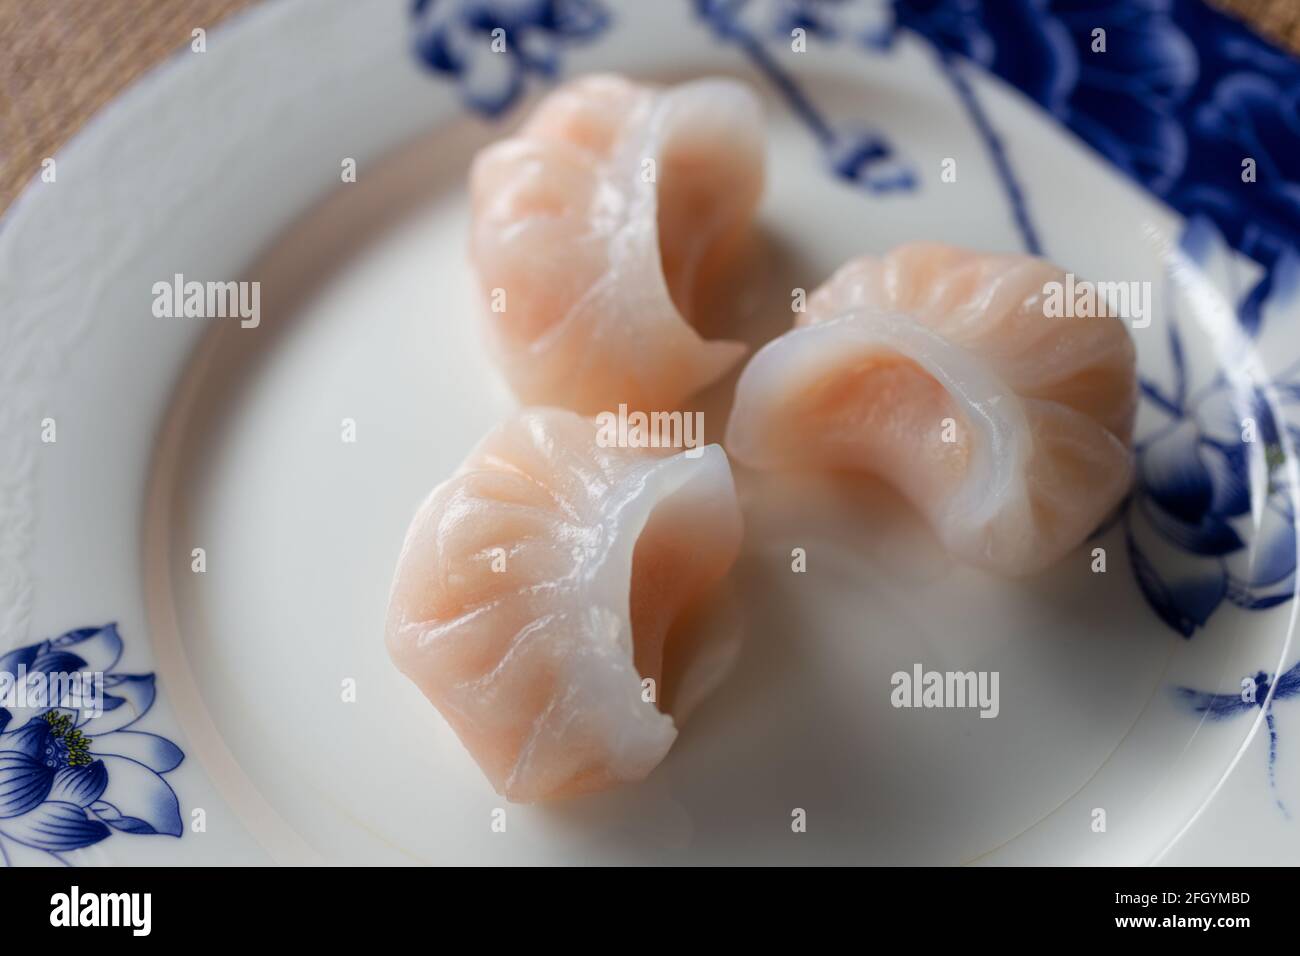 Chinese authentic traditional dish: Cantonese style dumplings Har gow with shrimp, closeup on white and blue plate Stock Photo